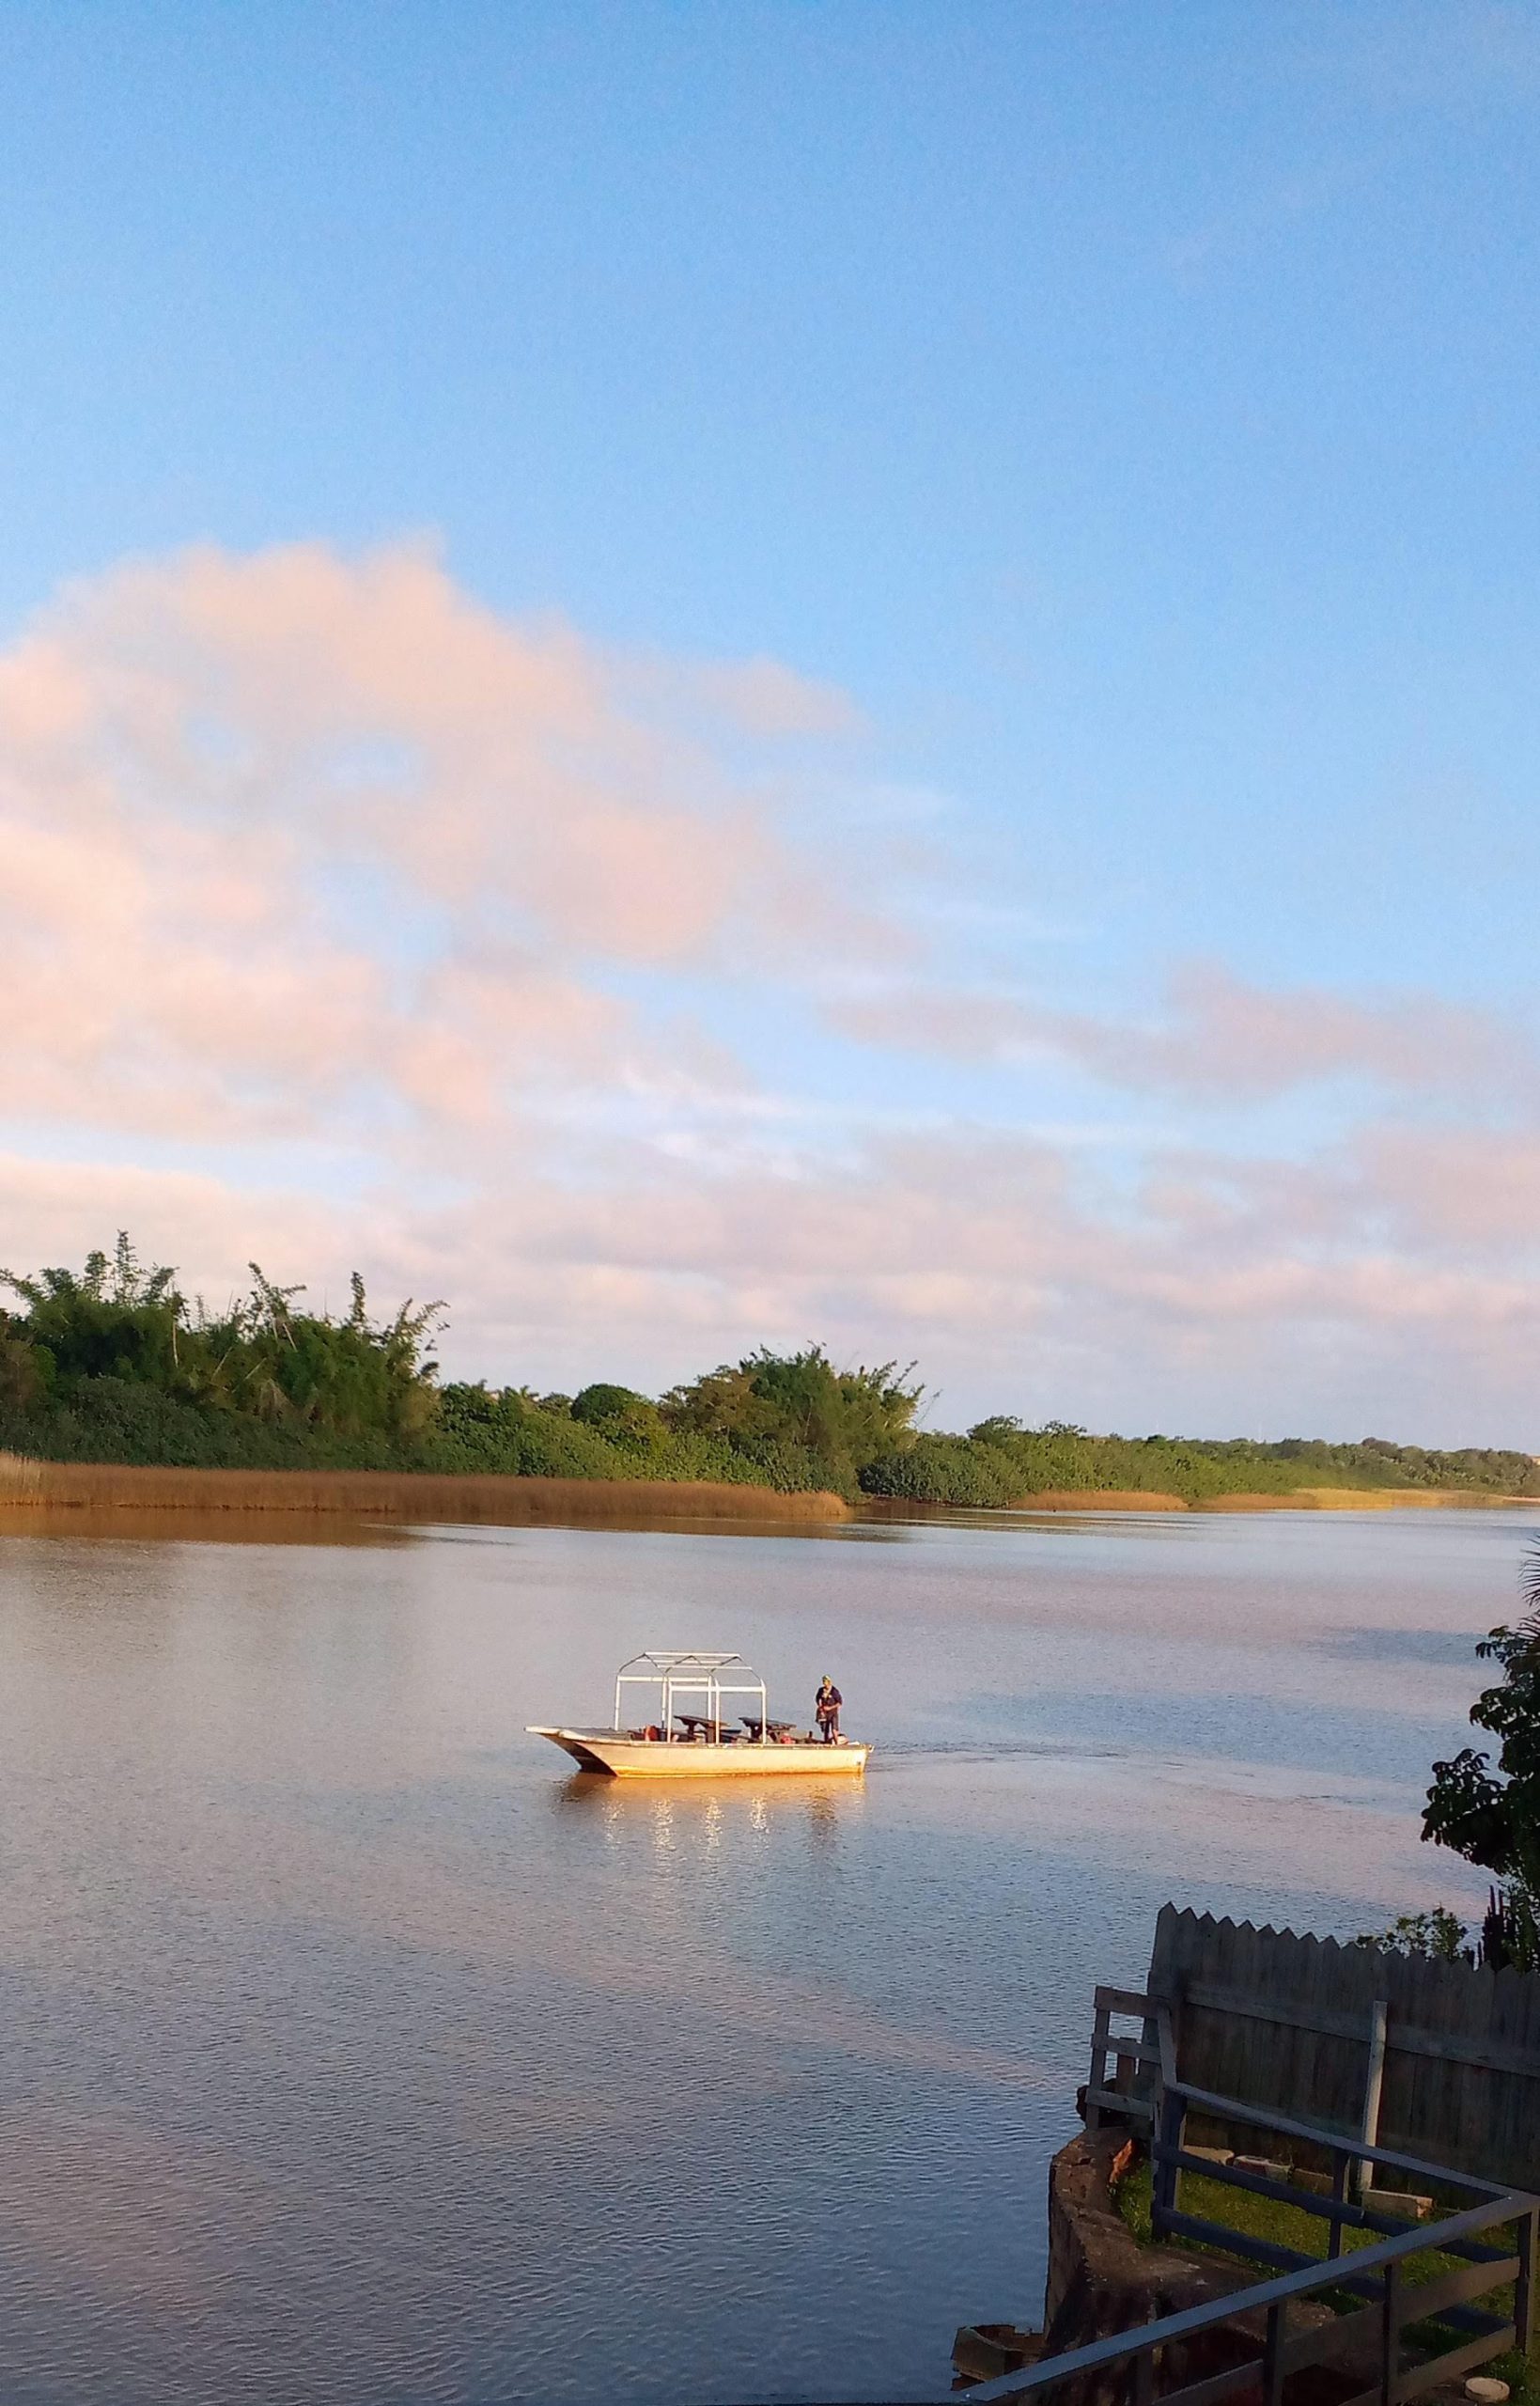 The good ship Umzimkulu is ready to take you on the Umzimkulu River for your end-of-year party!